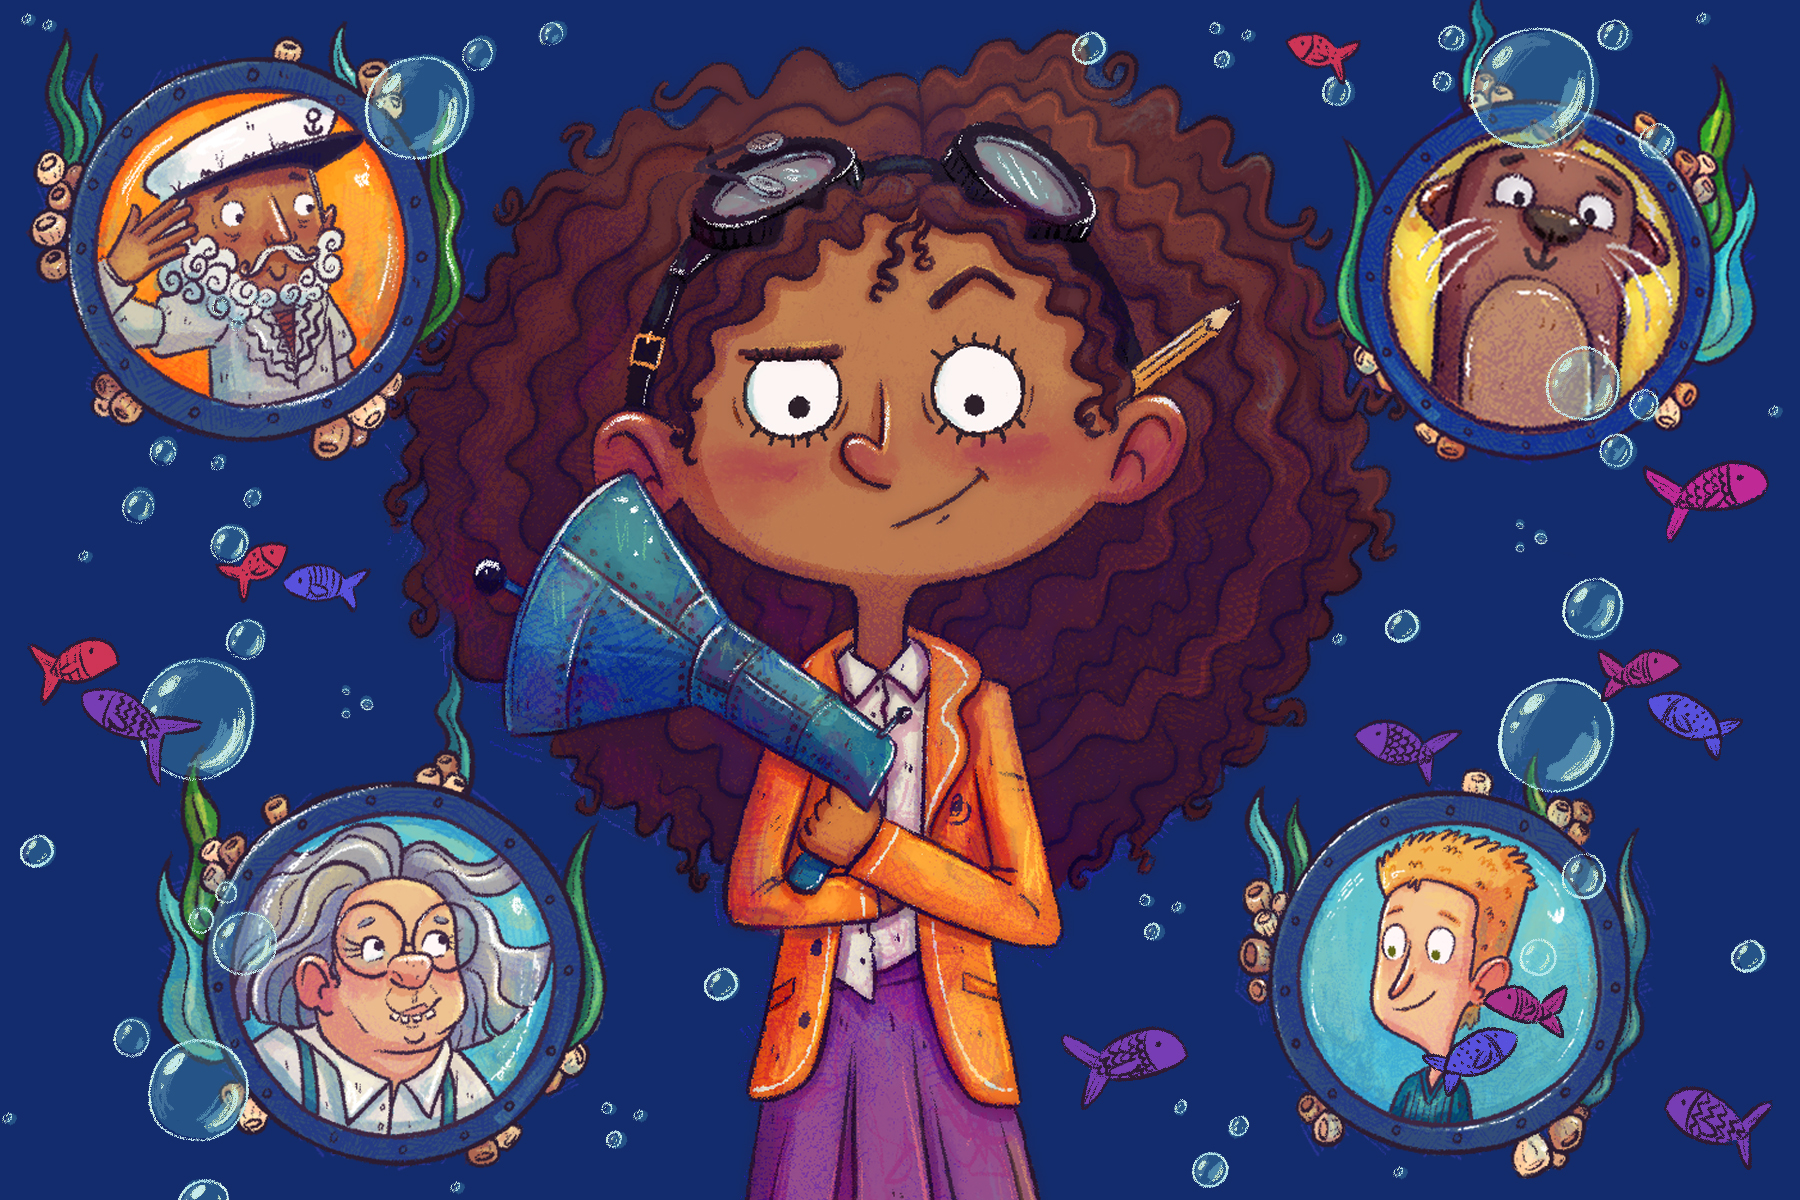 An illustration from Leonora Bolt: Deep Sea Calamity showing Leonora standing in the centre with her arms crossed and holding an invention against a dark blue background with bubbles, seaweed and shells. Around her are four other illustrations of characters in the book